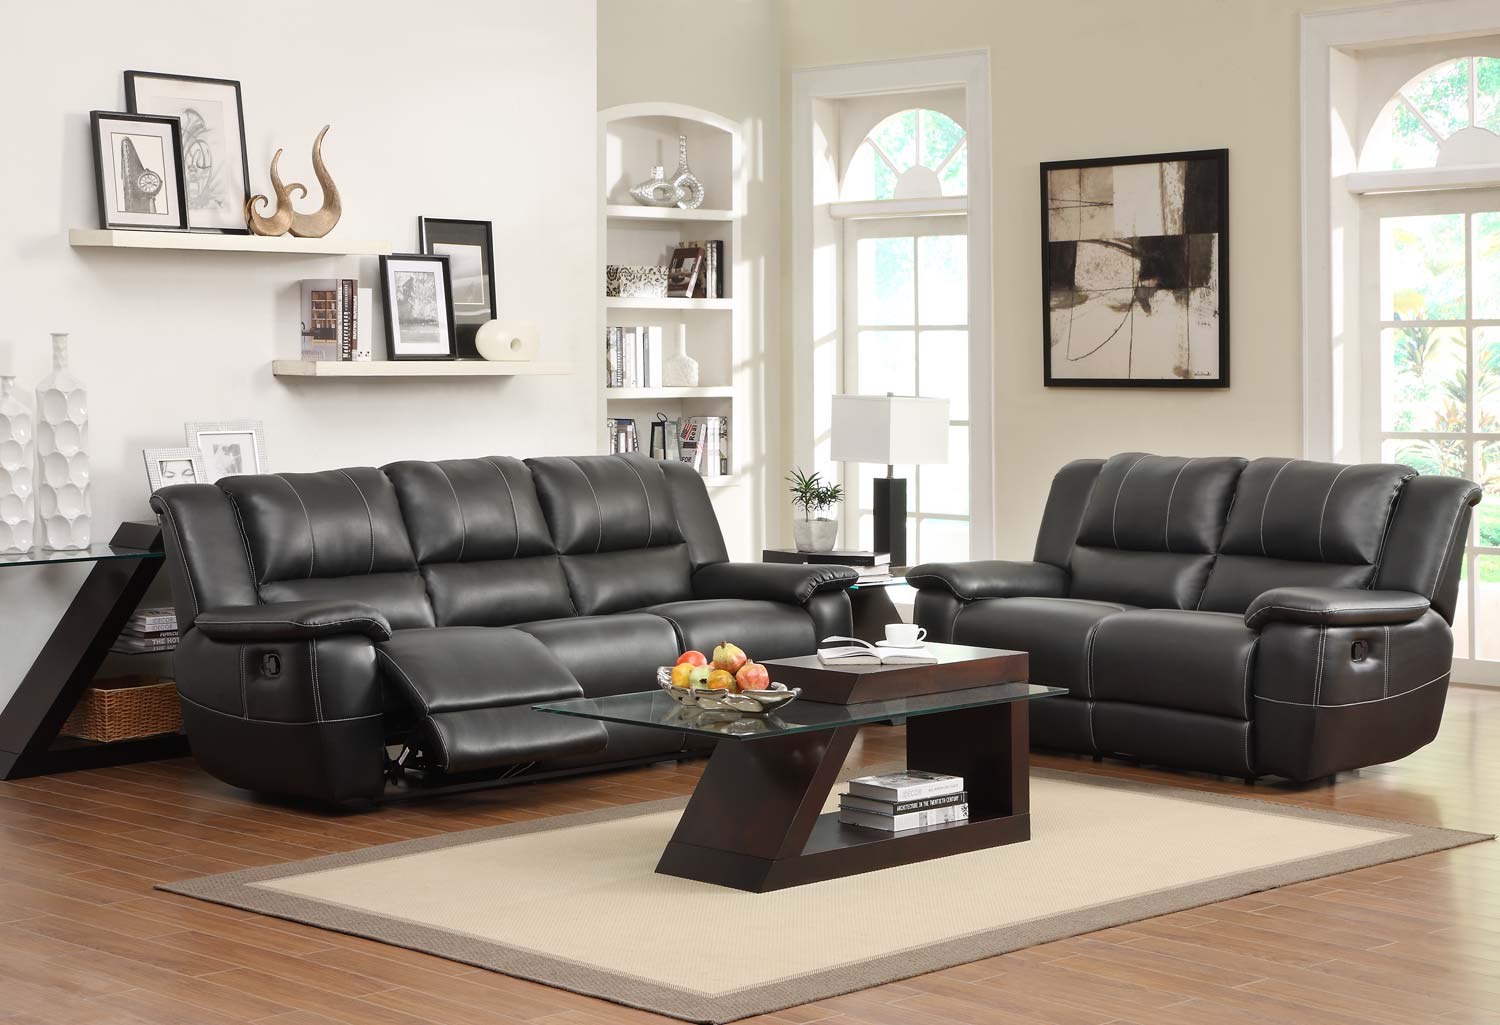 Homelegance Cantrell Reclining Sofa Set - Black - Bonded Leather Match